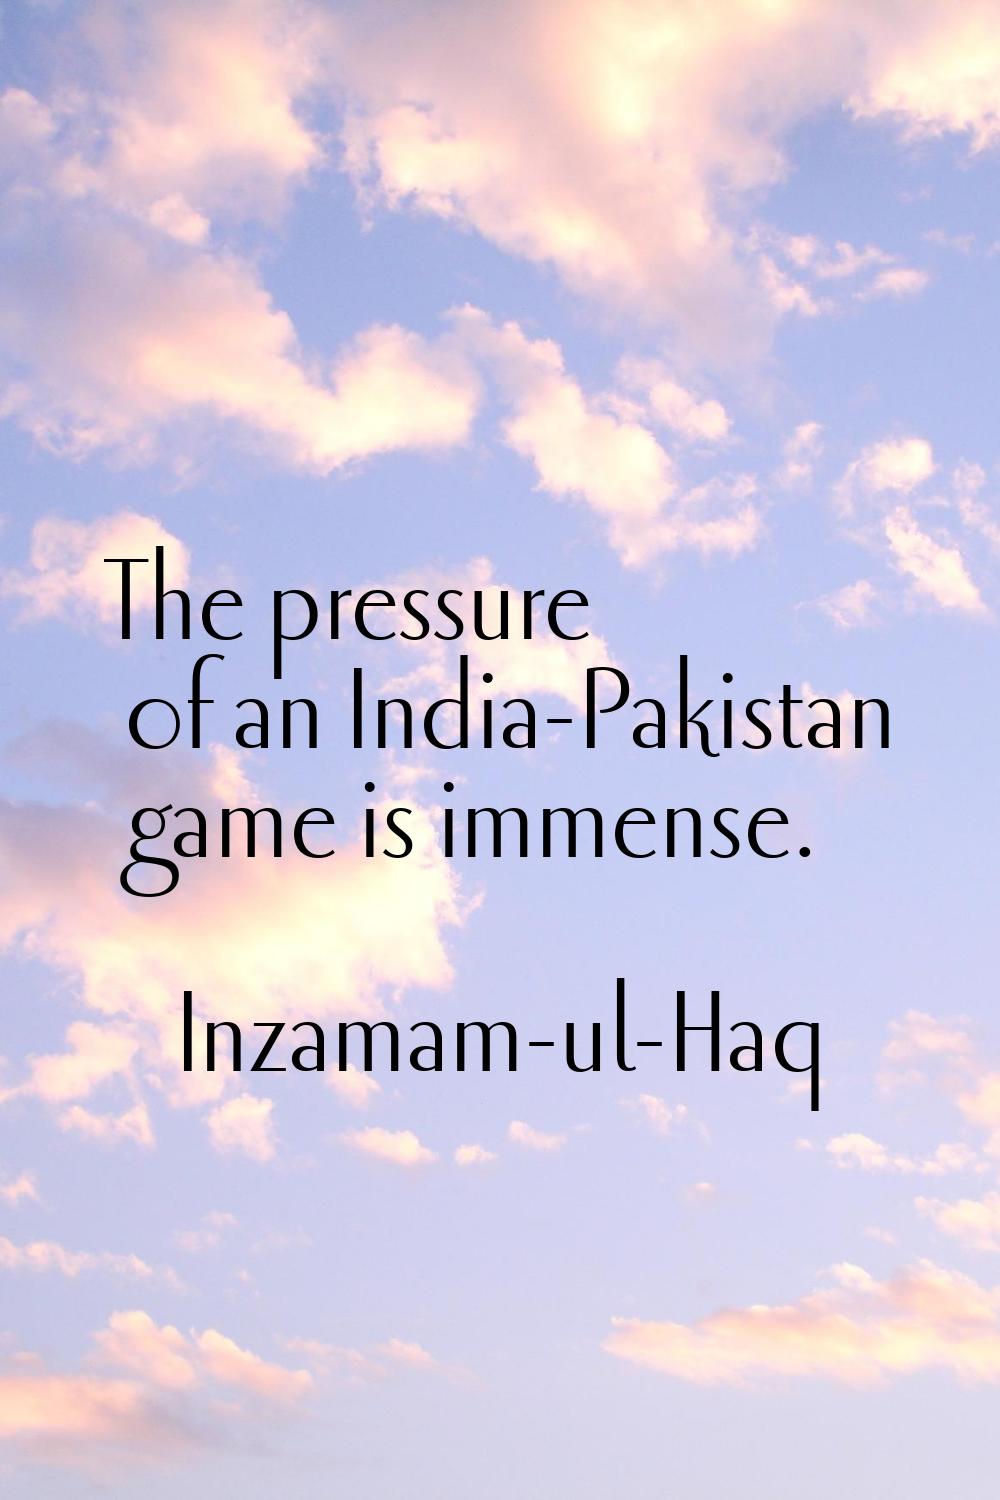 The pressure of an India-Pakistan game is immense.